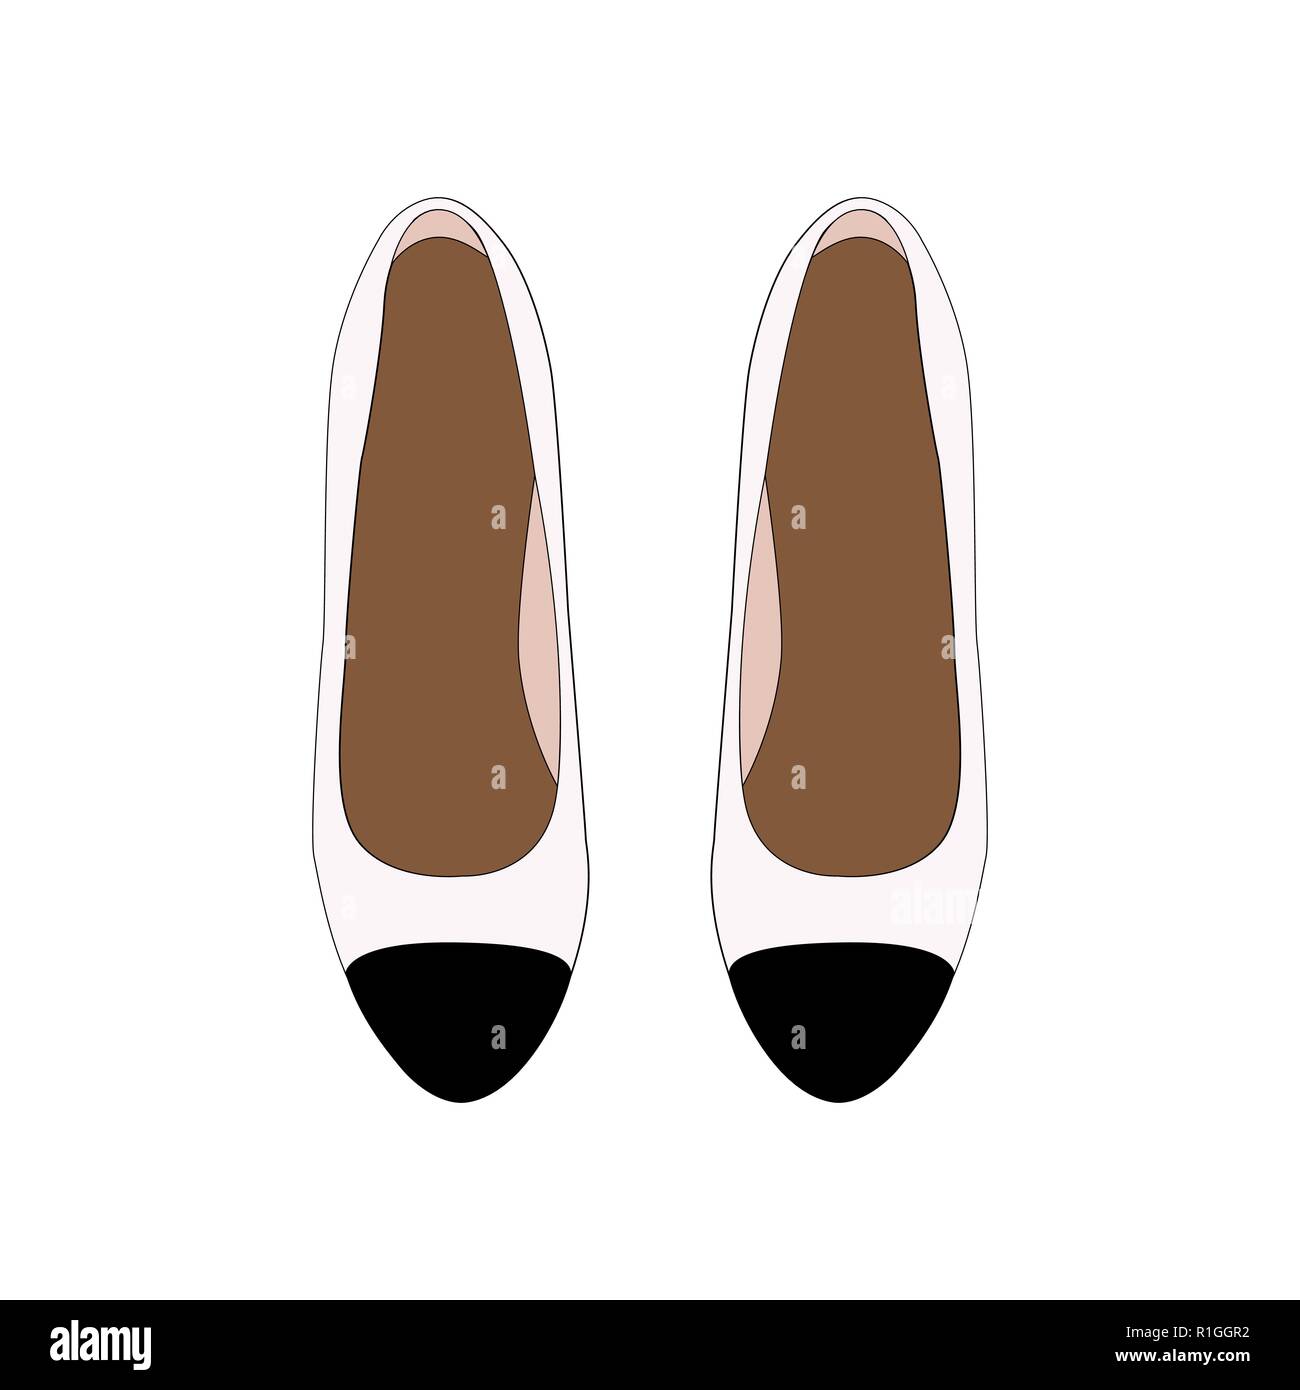 Woman Retro shoes, white Leather Pumps with Black Toe. Vector Illustartion. Stock Vector